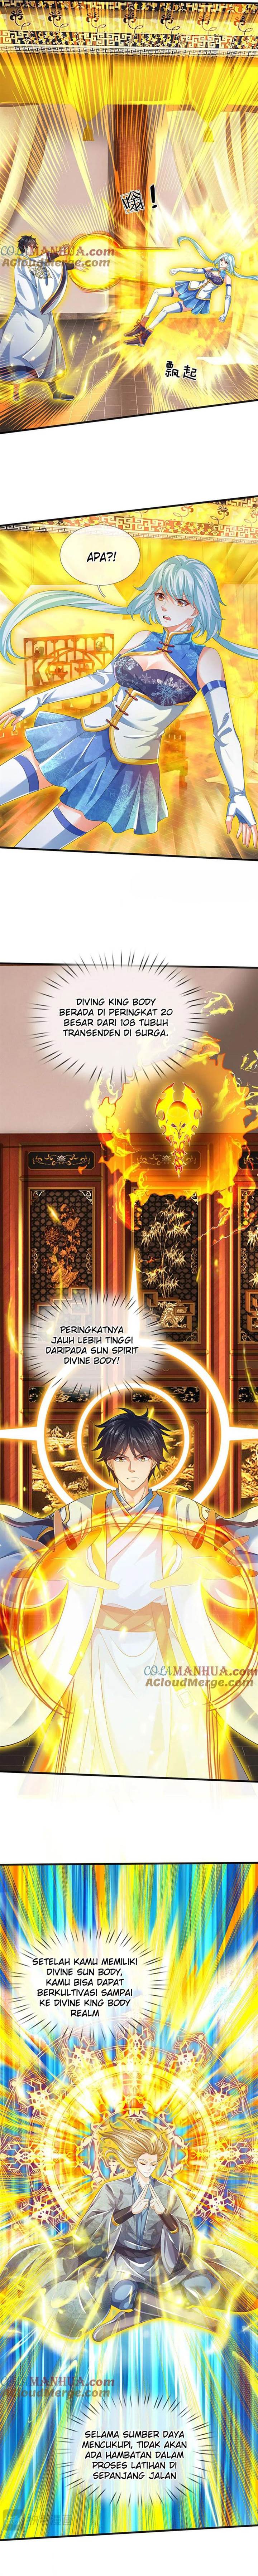 Star Sign In To Supreme Dantian Chapter 262